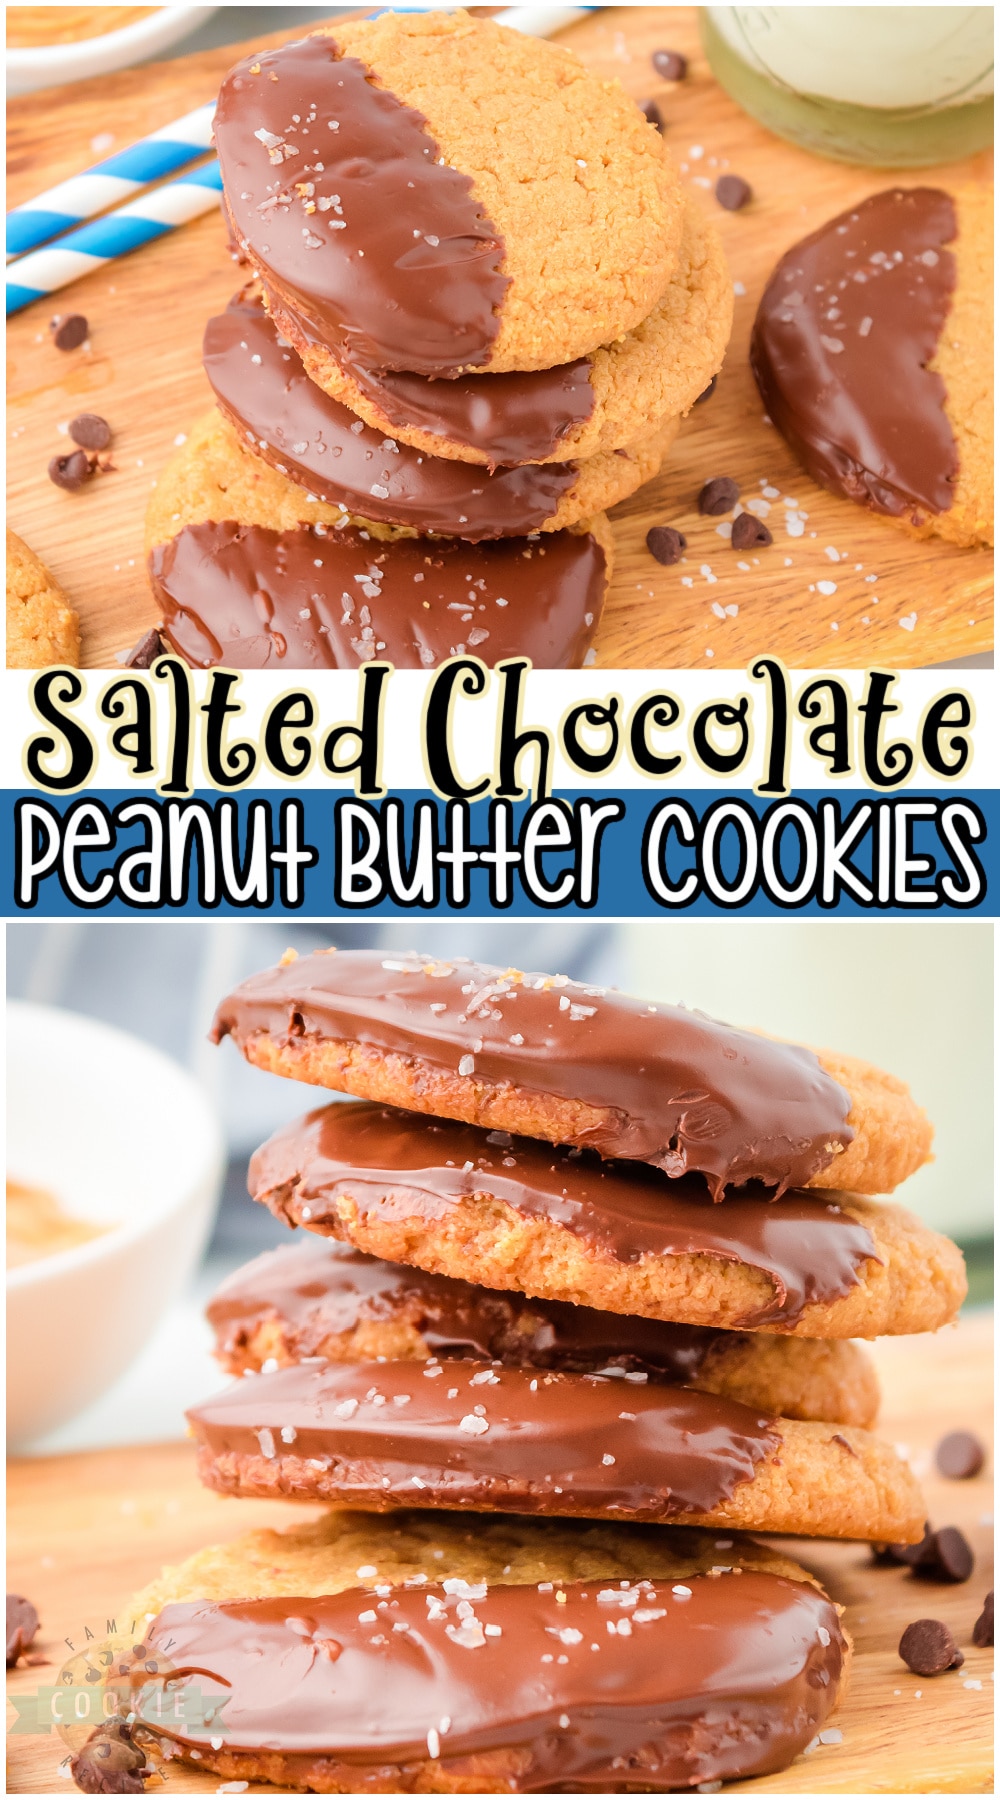 Chewy Peanut Butter Cookies dipped in chocolate, need I say more? Perfect homemade peanut butter cookies are gluten free and made with just 7 ingredients!